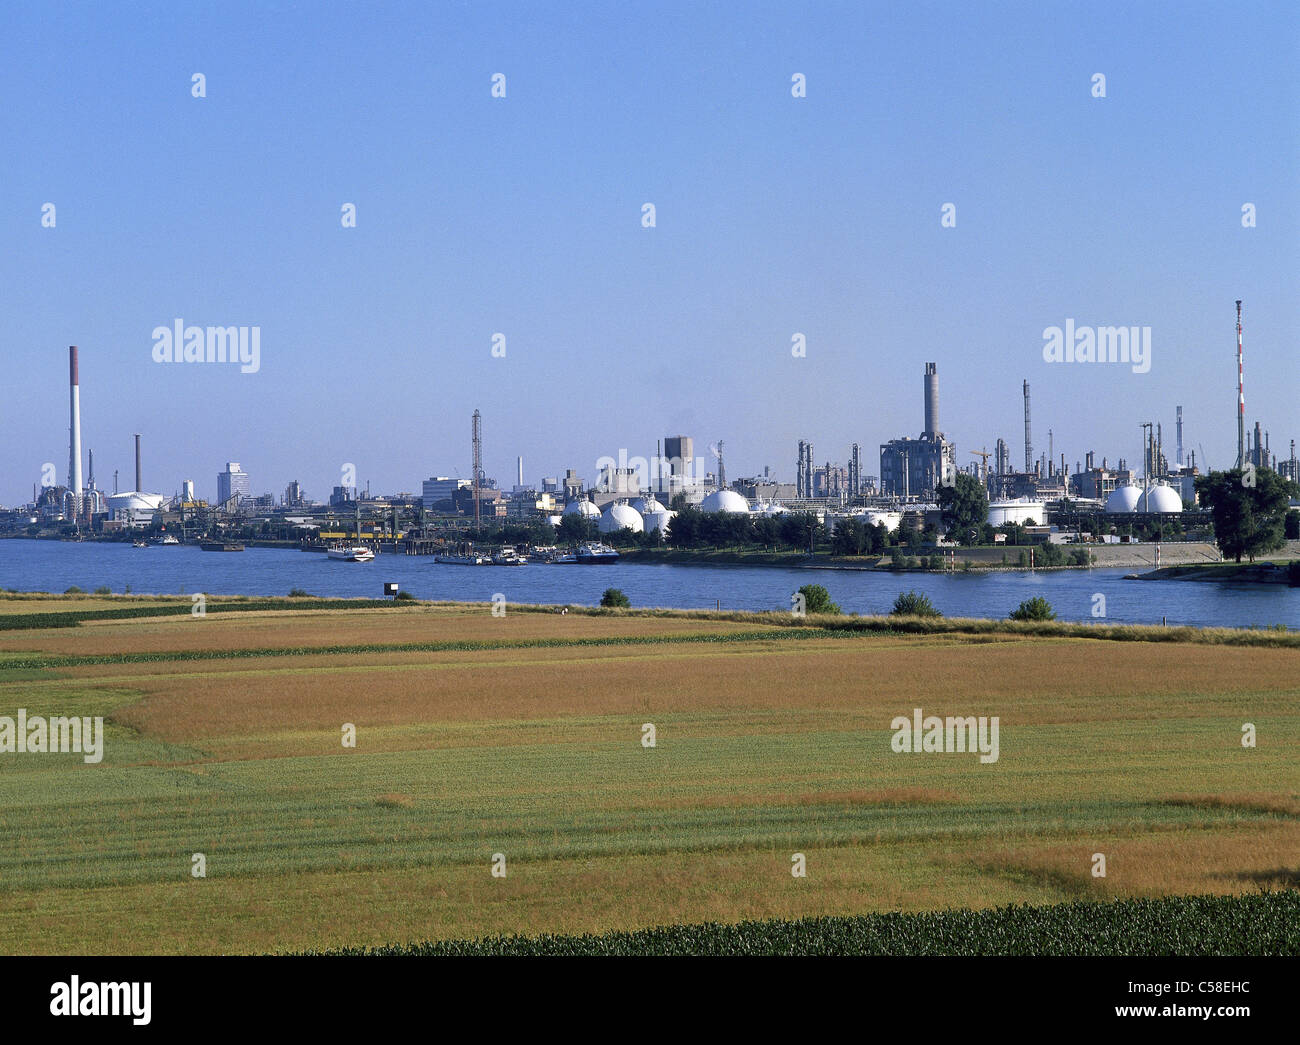 basf, building, chemical, chemicals, chemistry, economy, europe, european, facility, factories, factory, german, germany, indoor Stock Photo